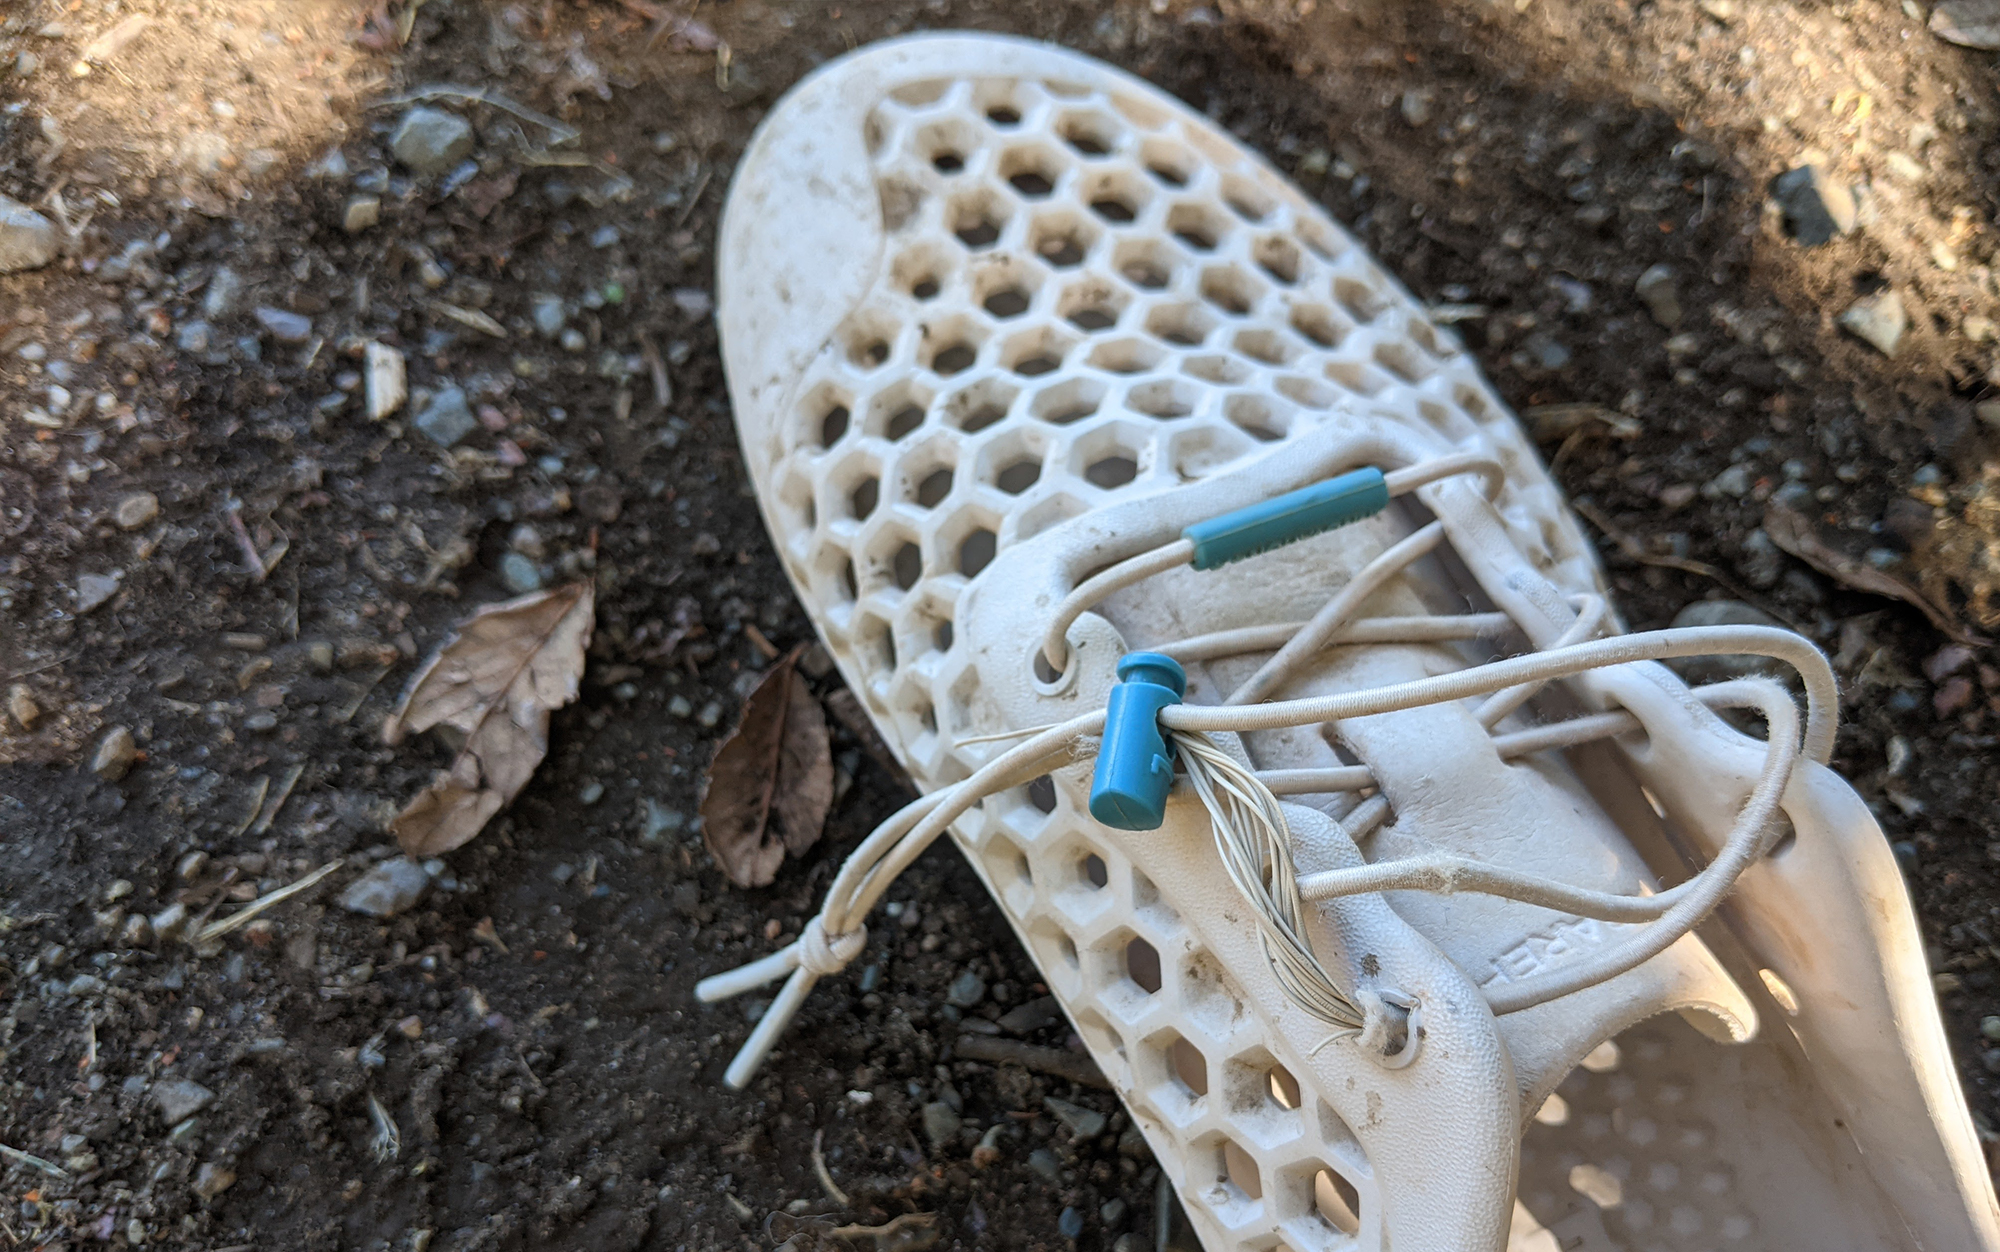 One fail point that has cropped up on the Vivobarefoot Ultra III Bloom over time is with the laces, which are starting to fray after a moderate level of use. The rest of the shoe looks good as new (just extremely dirty). 